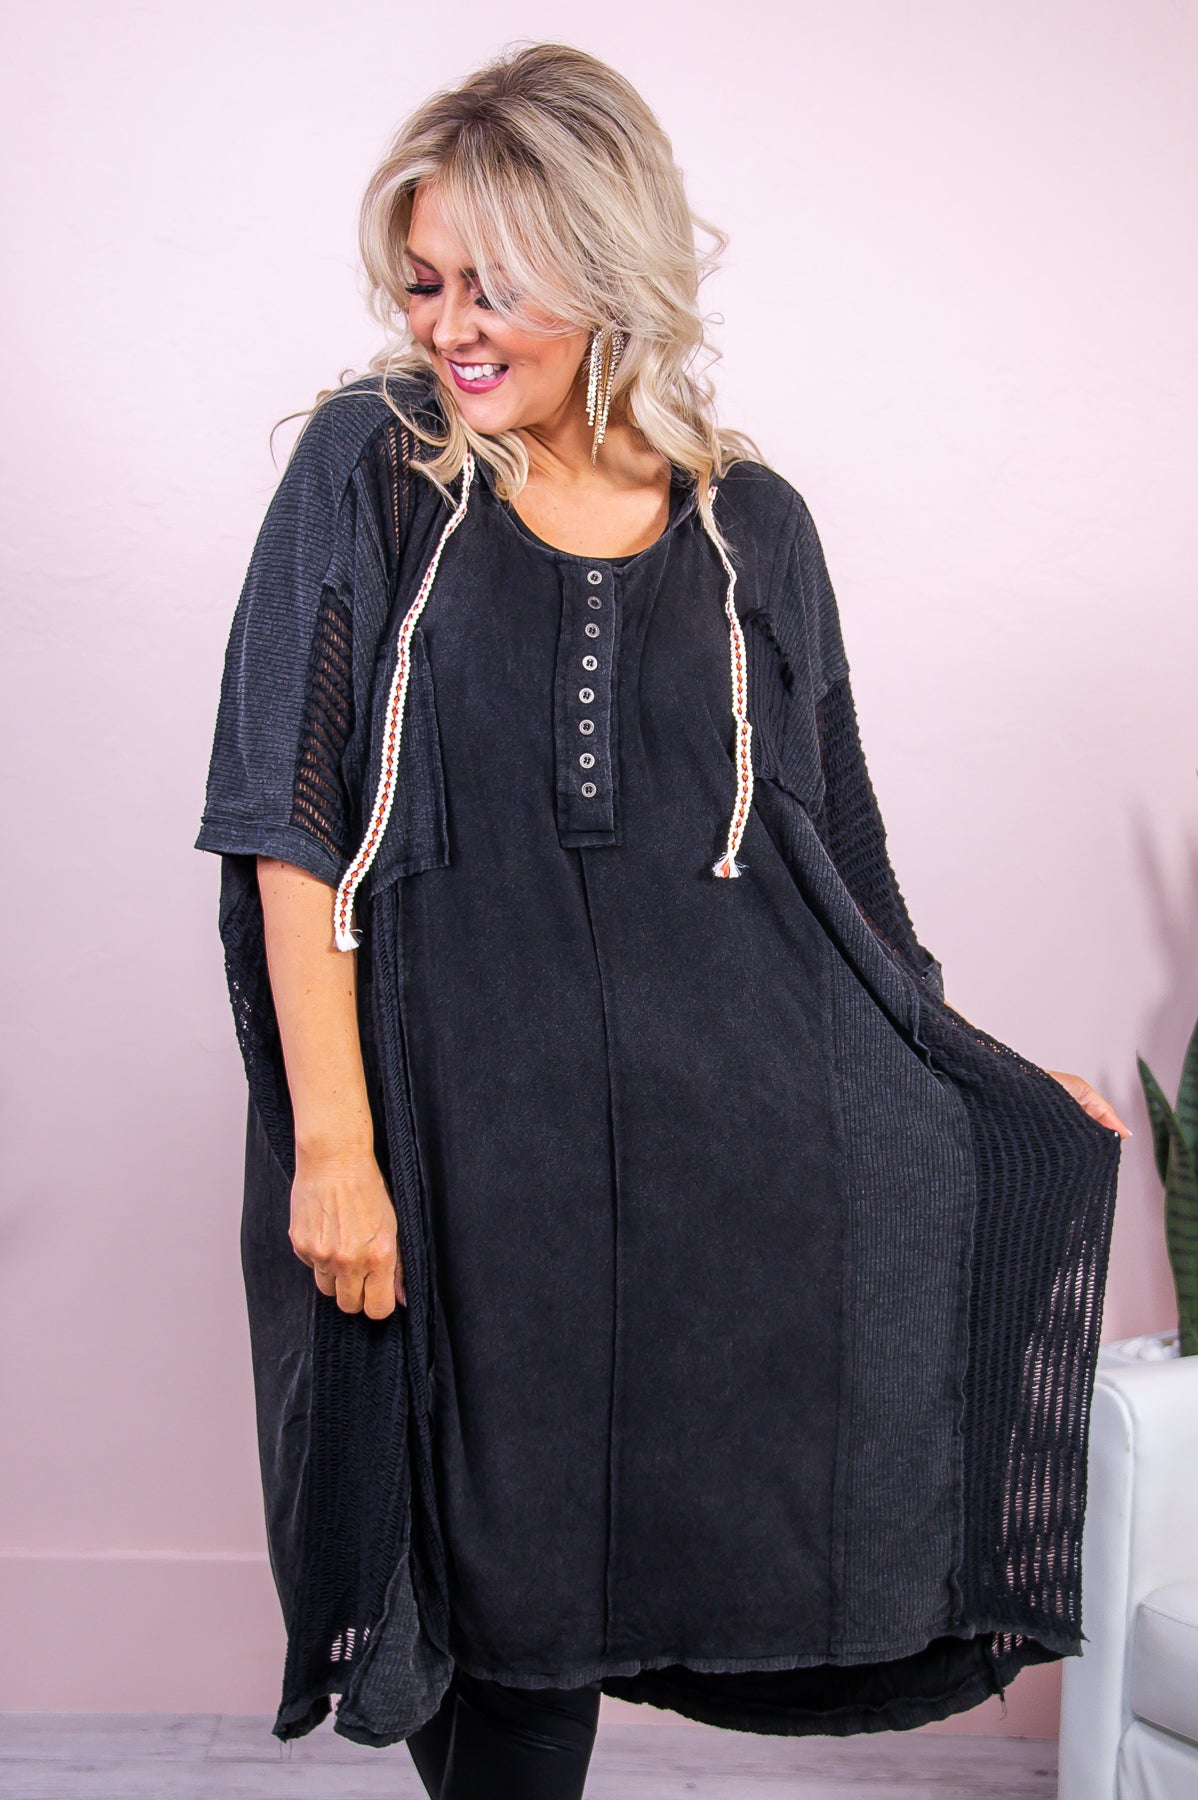 Haven't Looked Better Black Solid High-Low Poncho - T7971BK